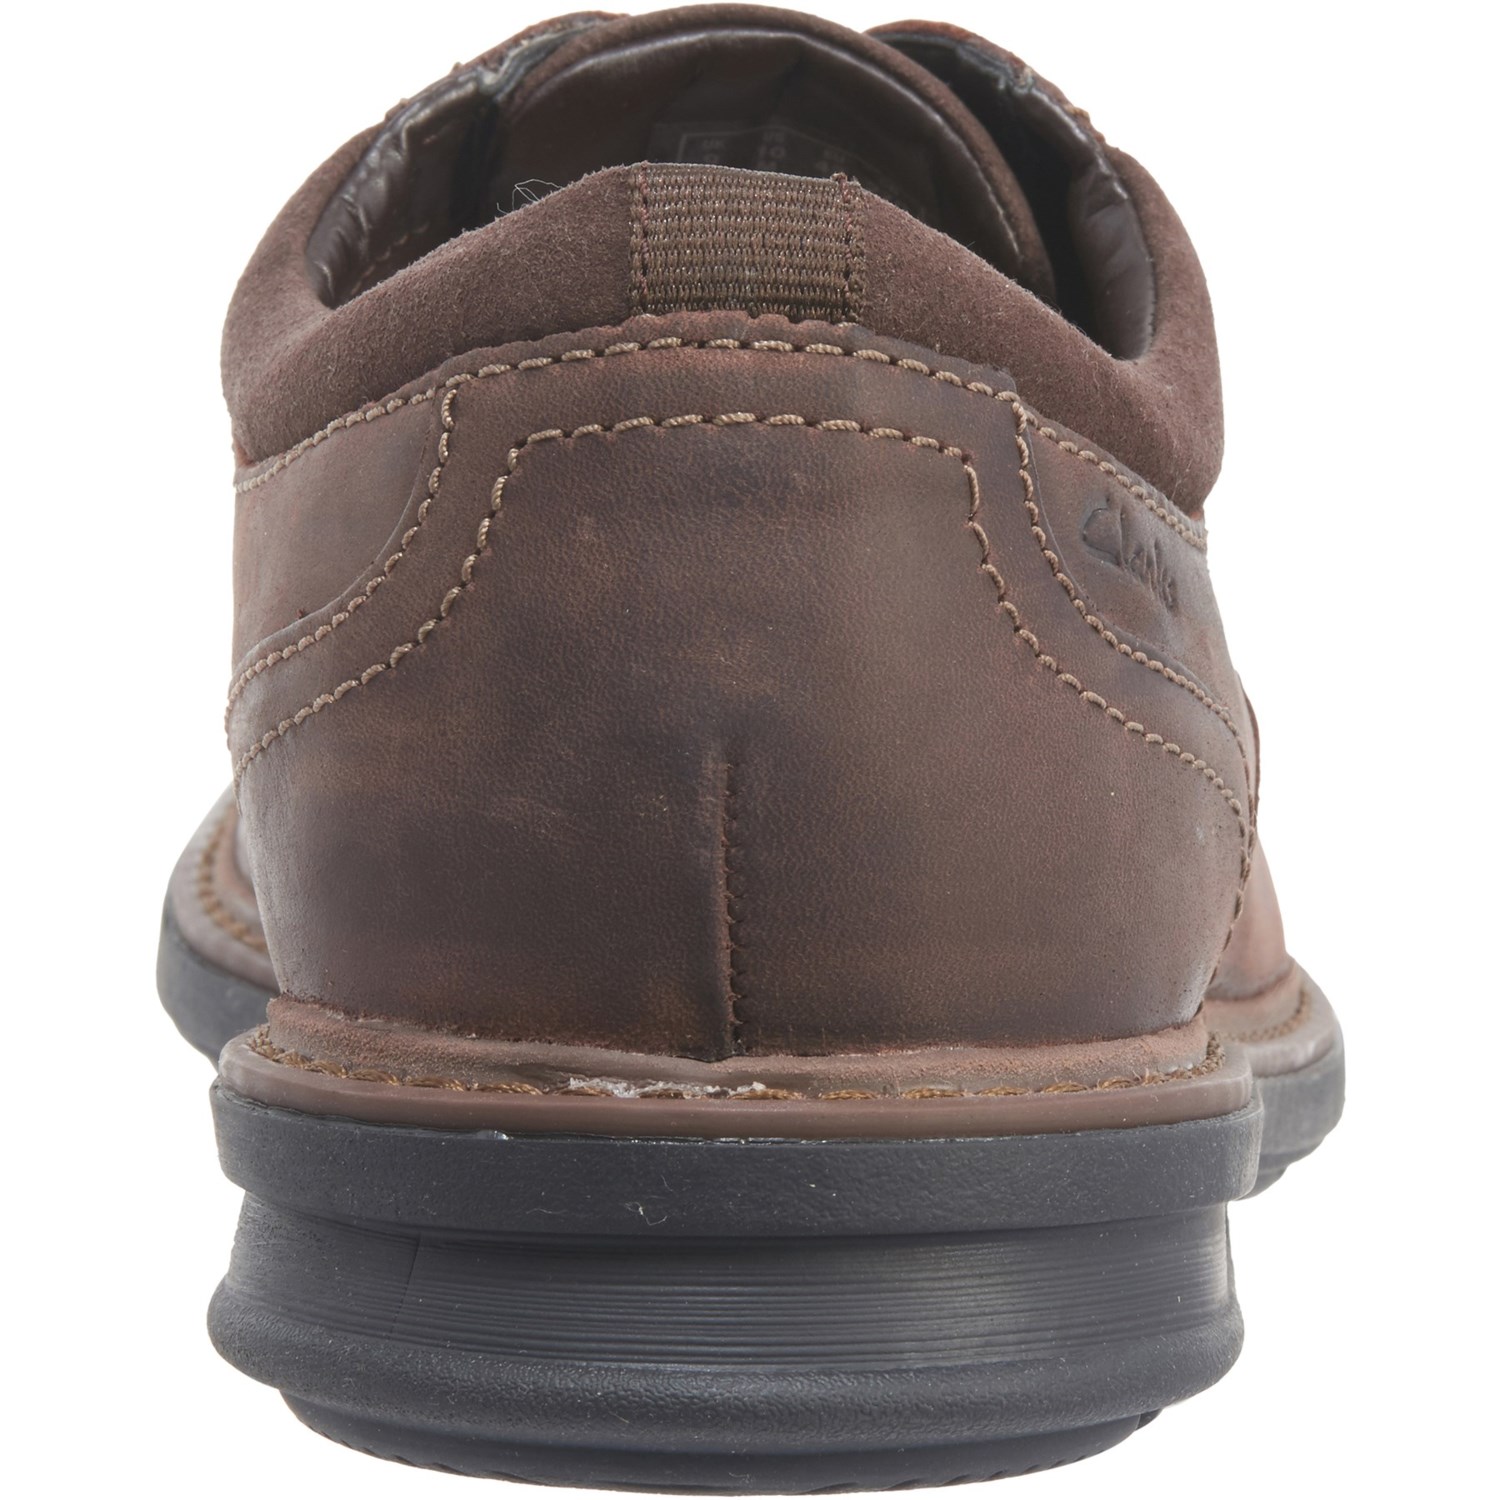 clarks mens oxford shoes